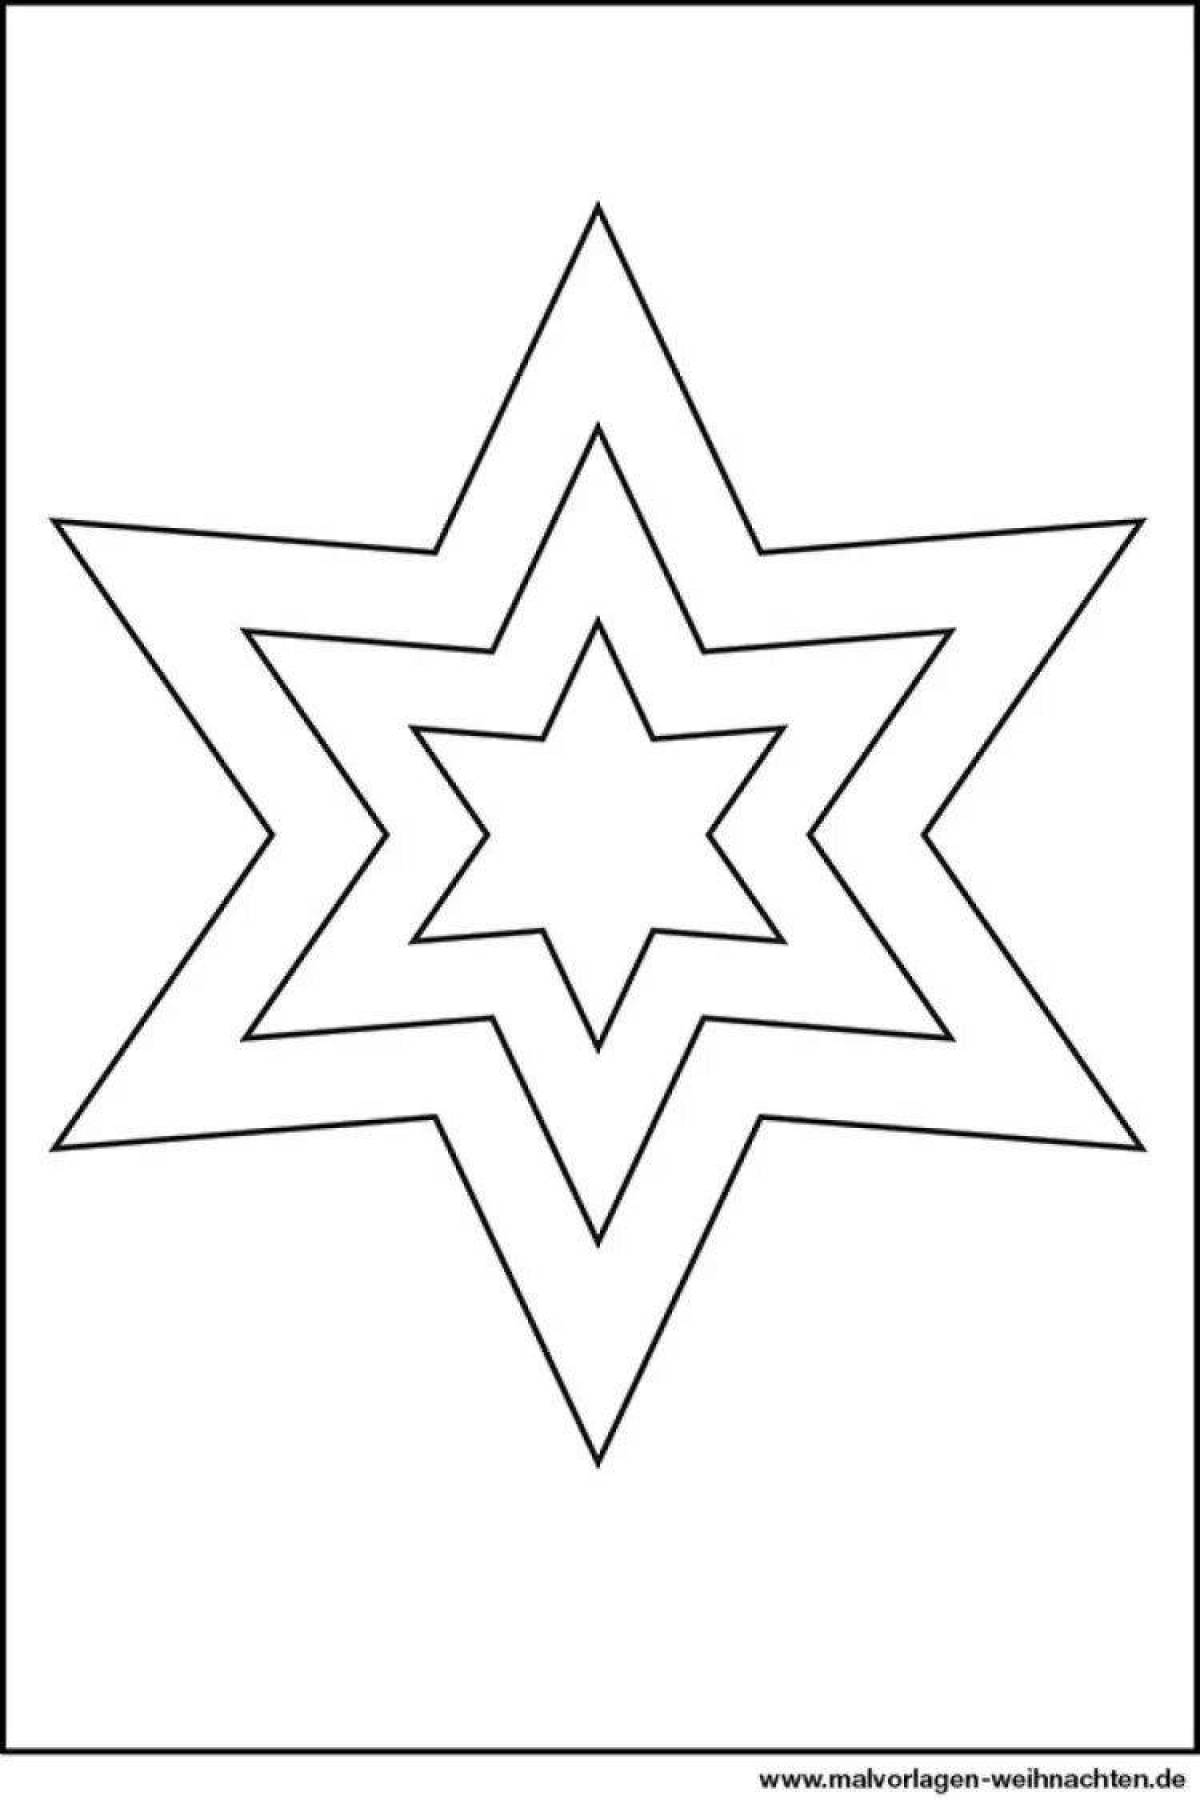 Coloring big six-pointed star